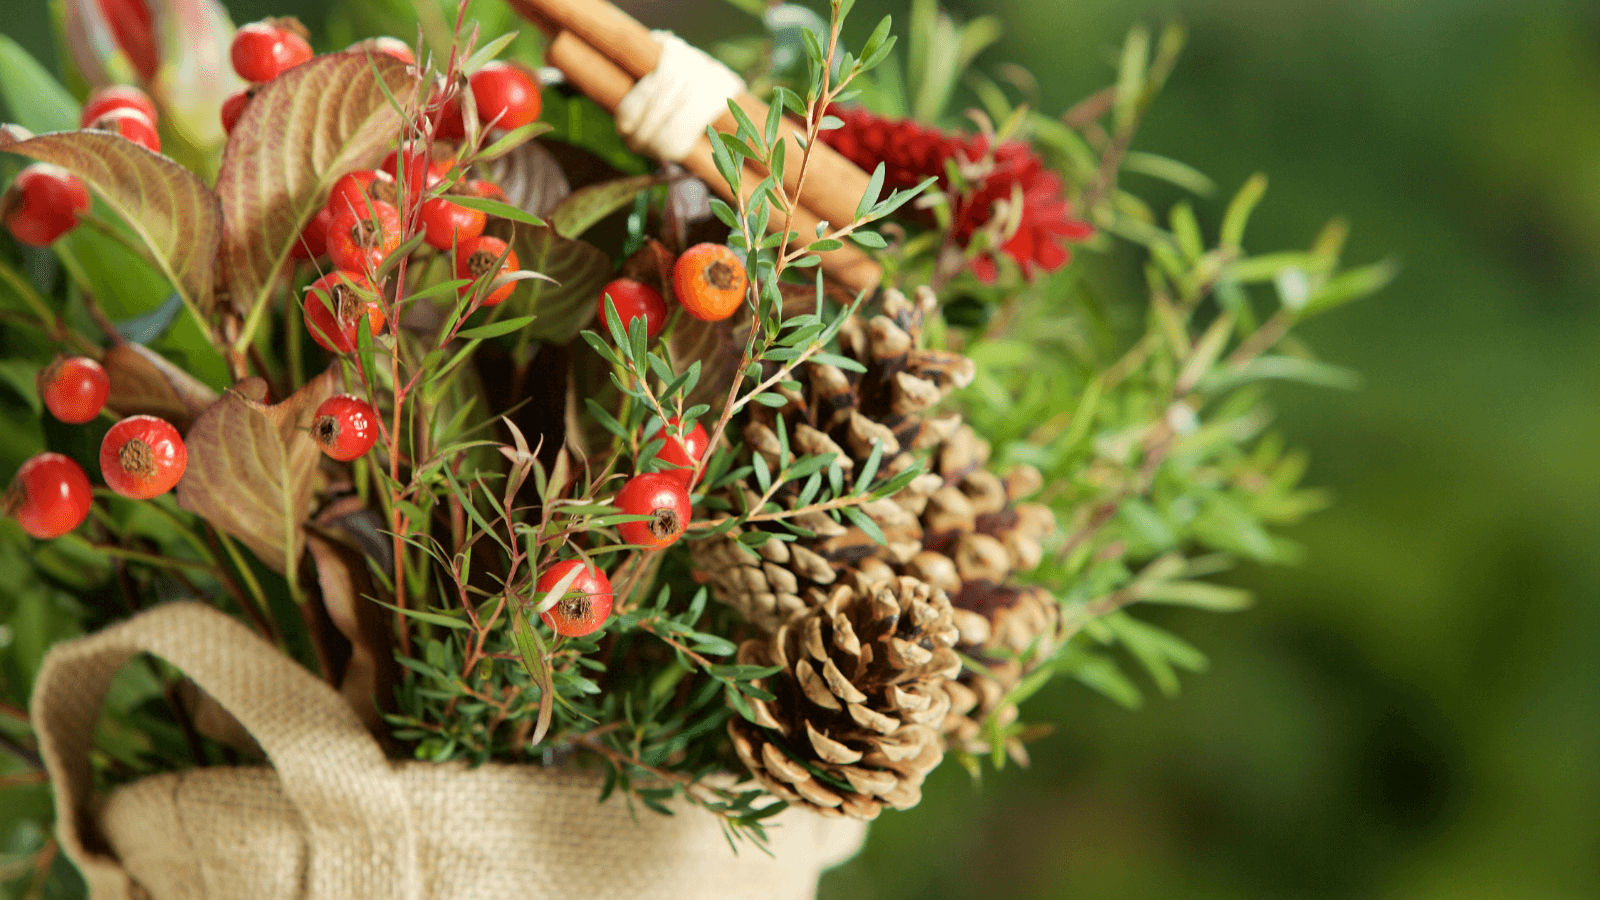 Burlap bag with holly, evergreens, berries, and pinecones